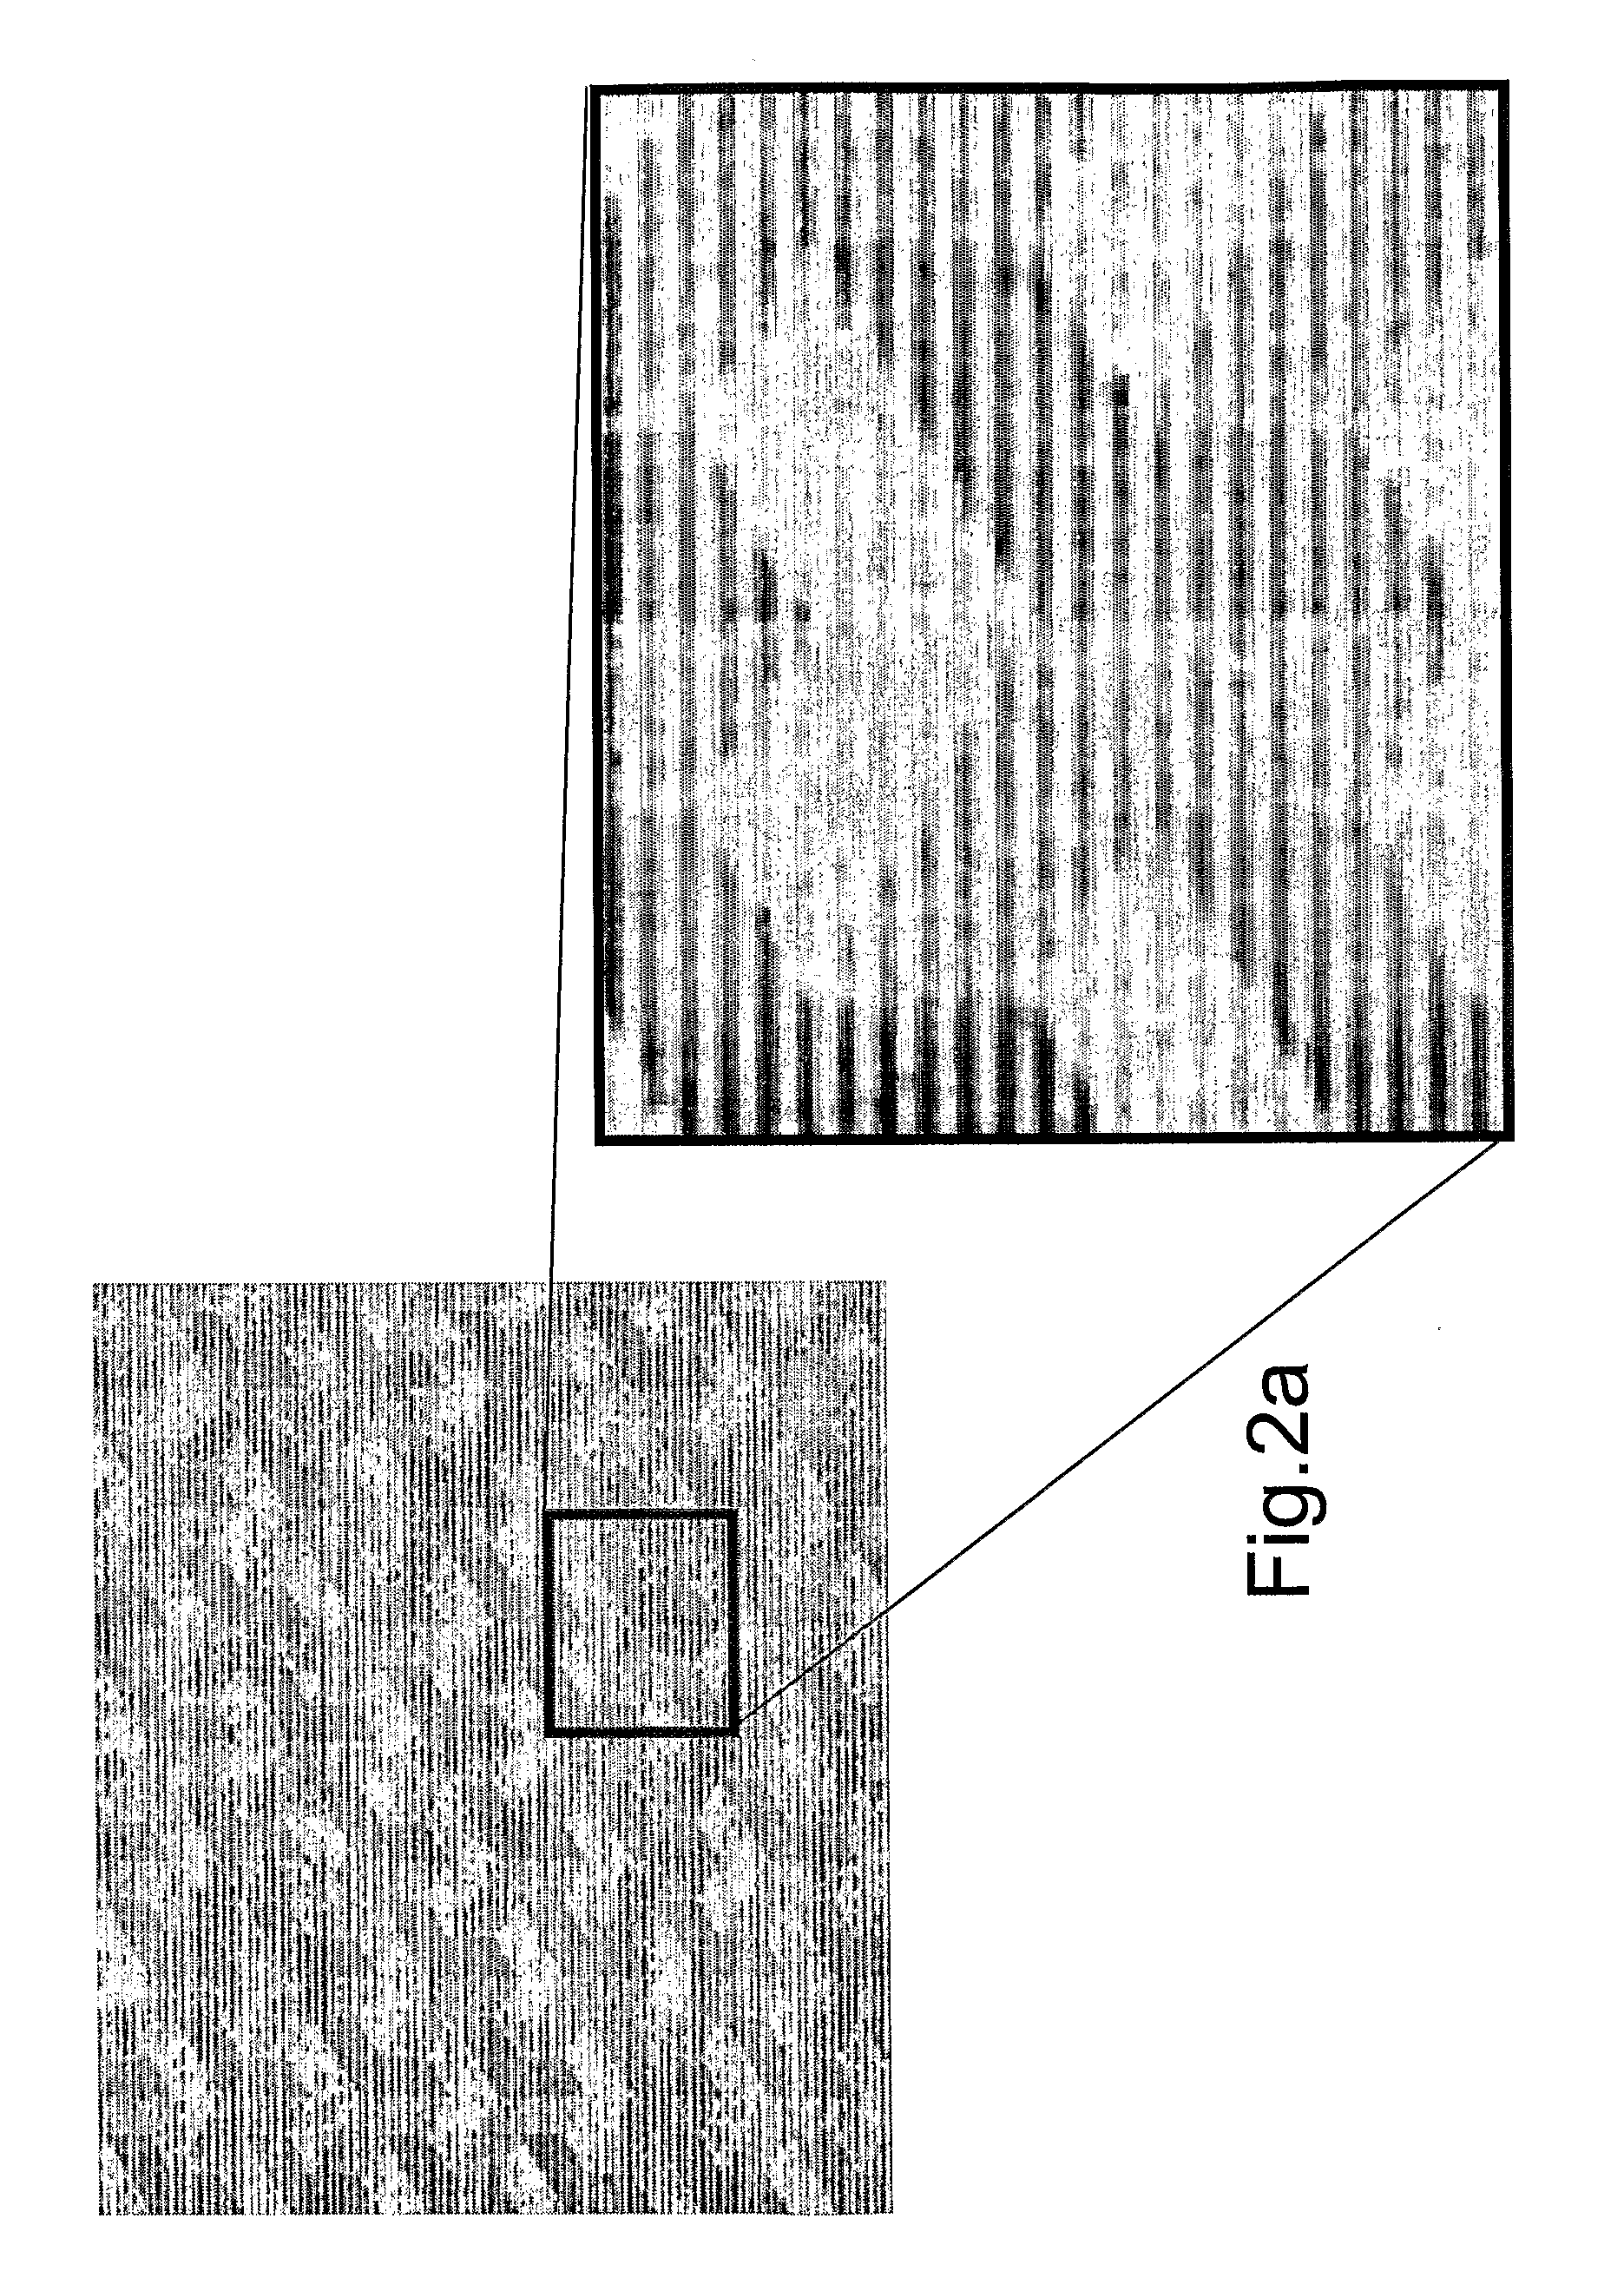 Process for Producing Security Papers, Intaglio Printing Press for Implementing Said Process, and Security Paper Produced According to Said Process